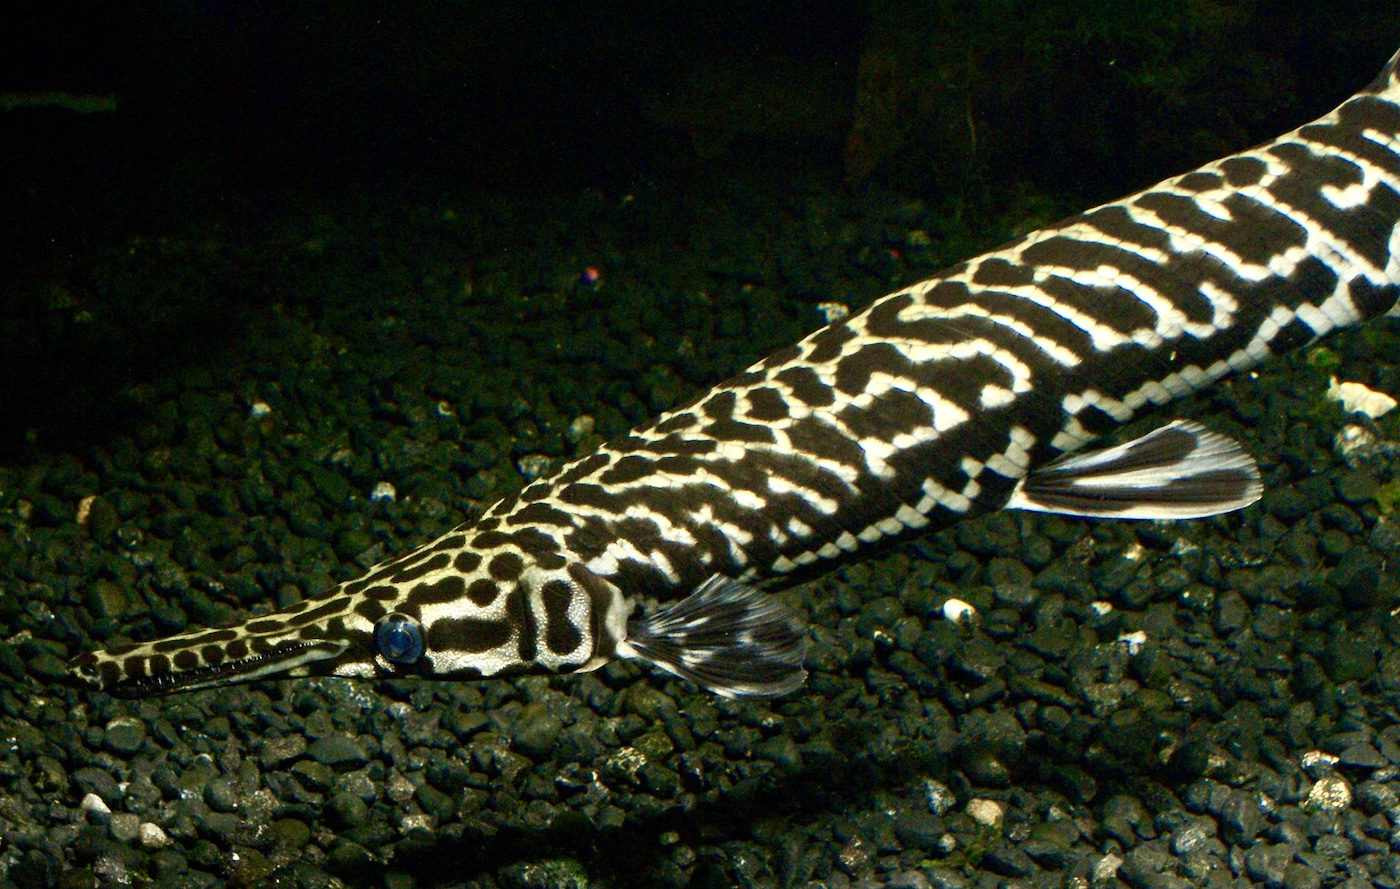 A long fish with a long nose covered in a brown and yellow pattern swims close to an underwater surface.